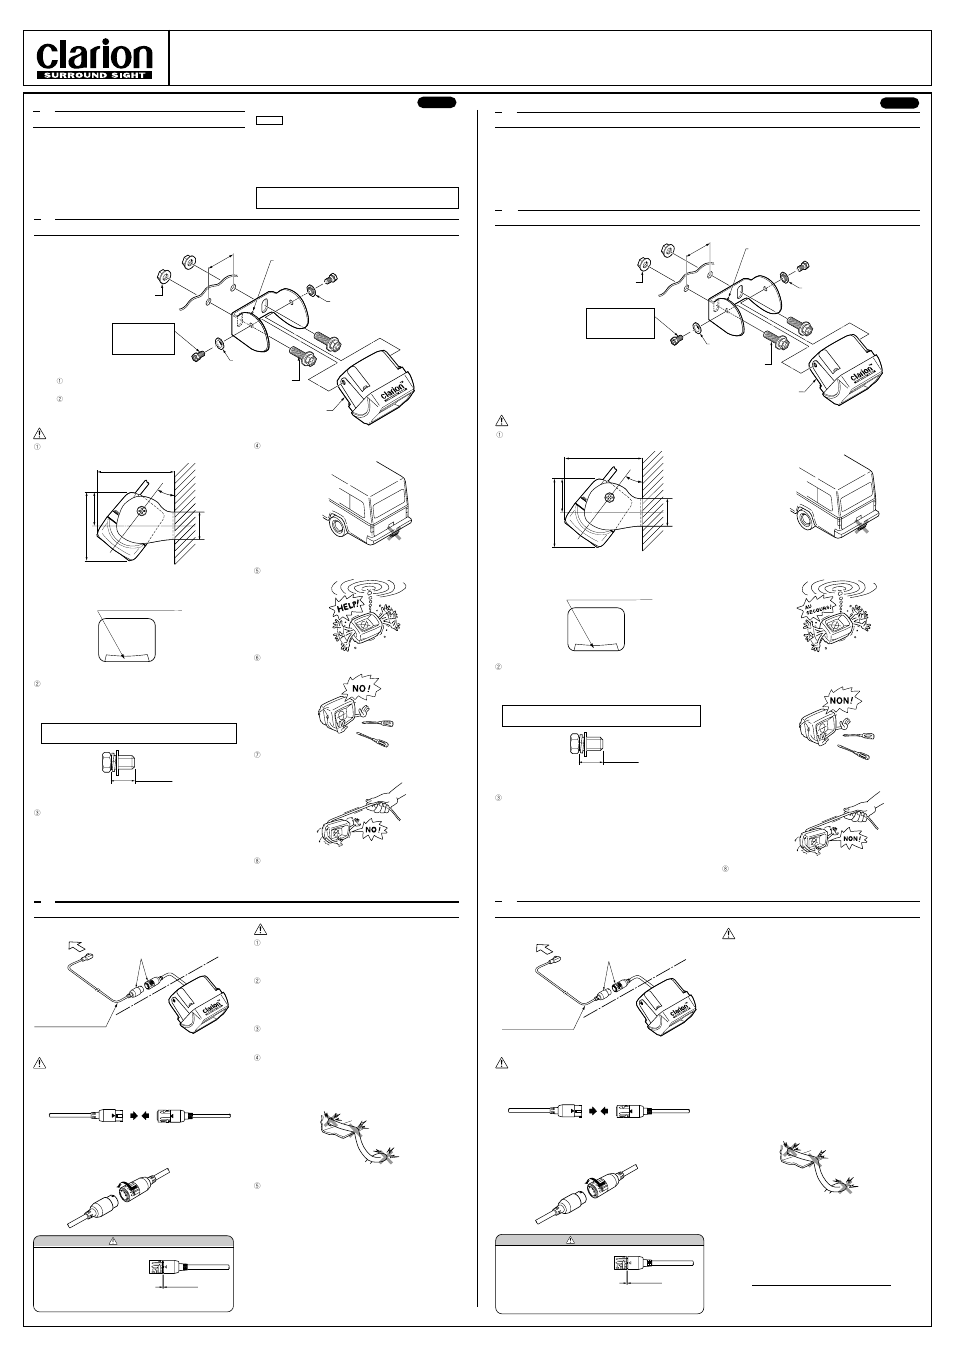 Clarion SURROUND SIGHT CC-425E User Manual | 2 pages